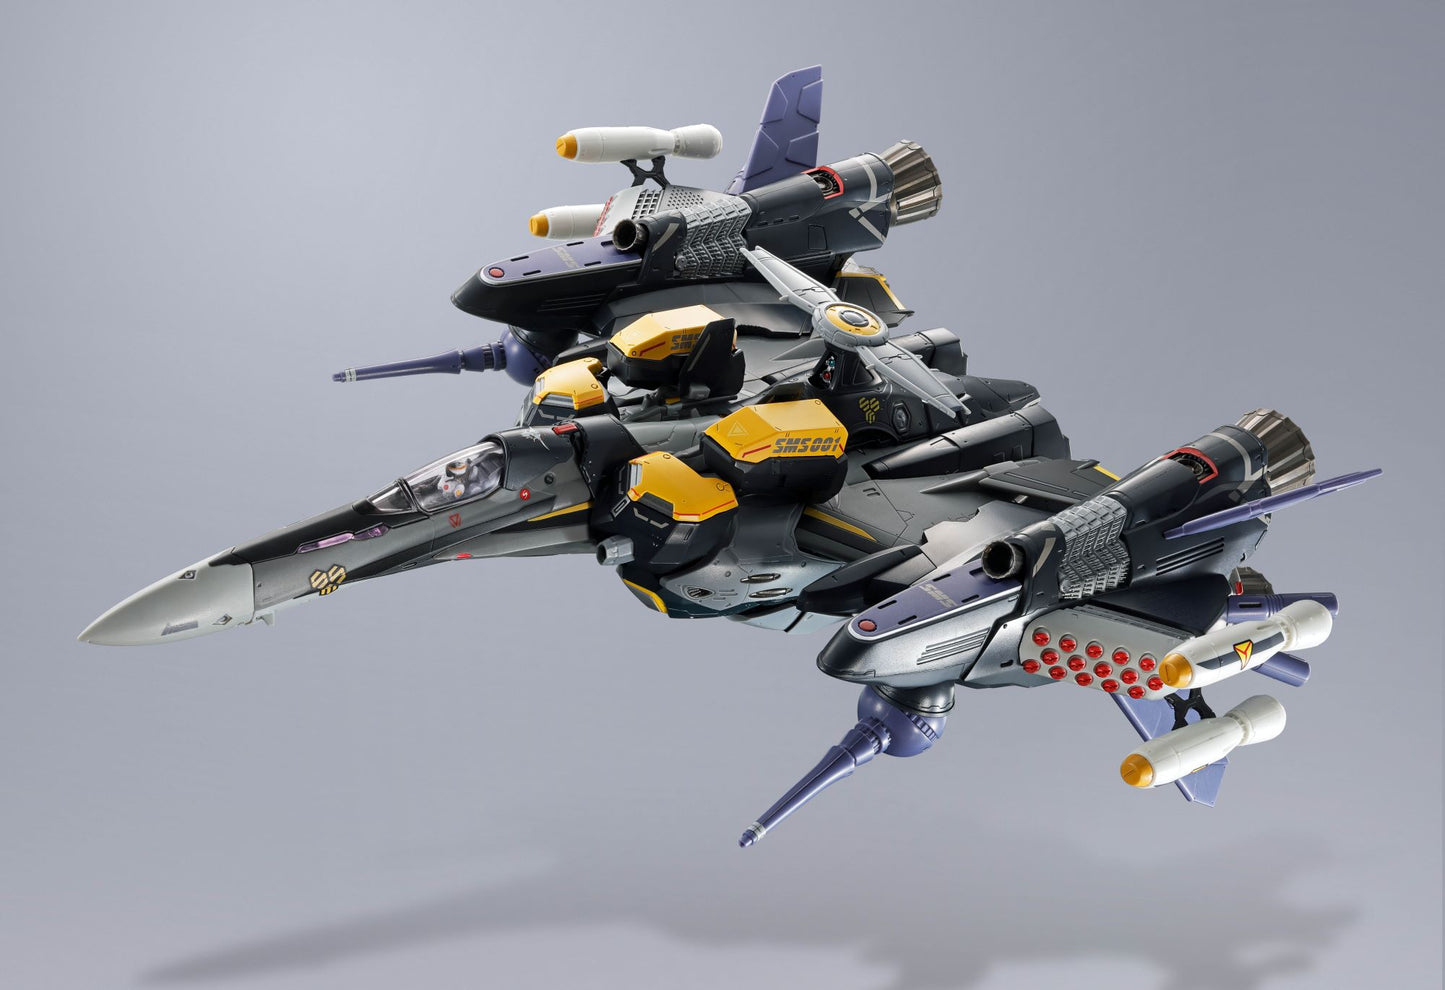 Macross DX CHOGOKIN VF-25S Armored Messiah Valkyrie (Ozma Lee) Revival Ver. jet mode with armored different view